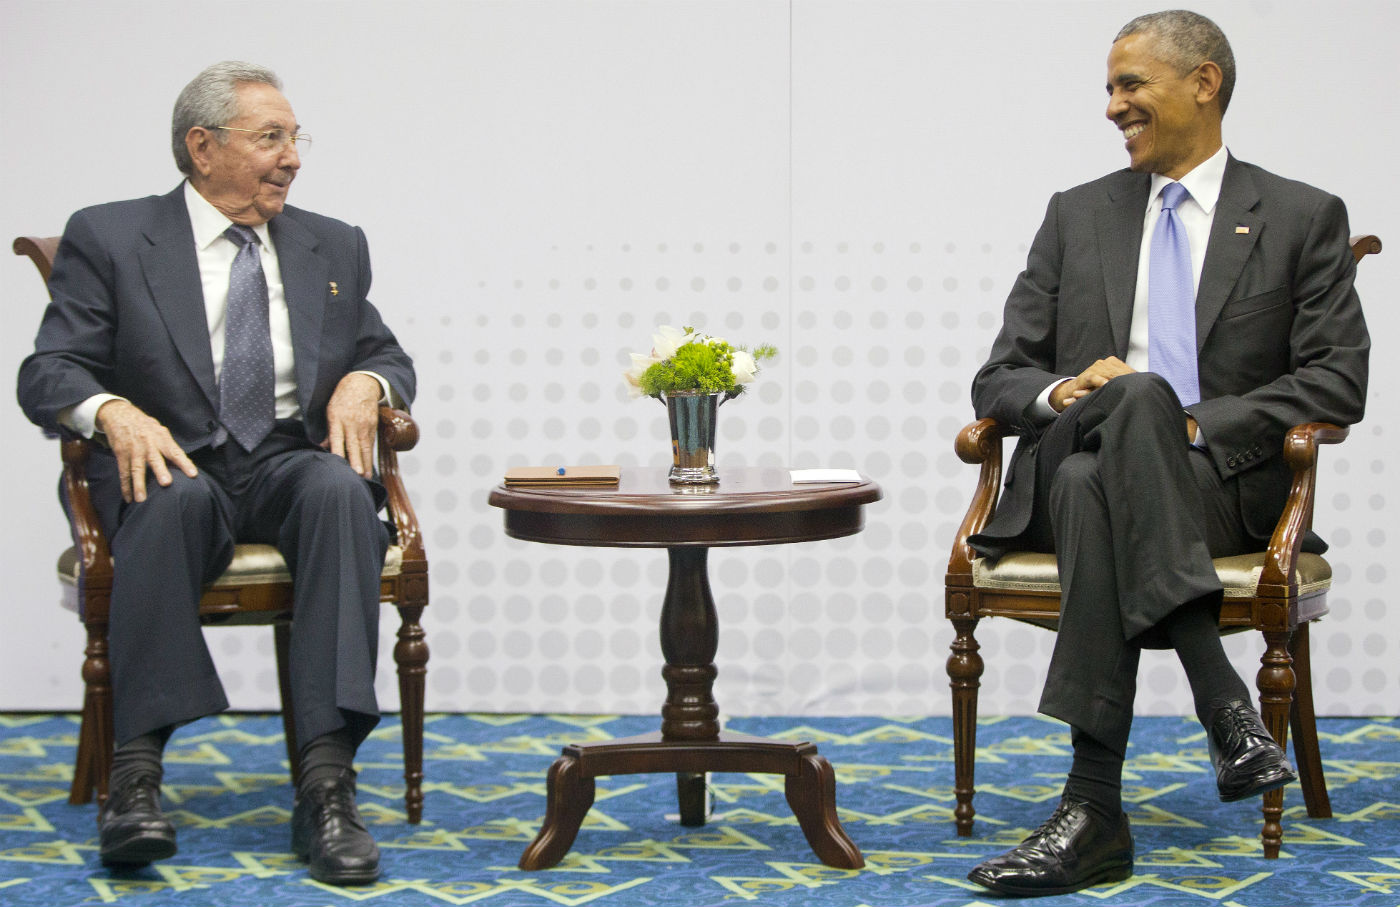 Our Man in Panama: How Obama’s Summitry Could Change Relations With Latin America